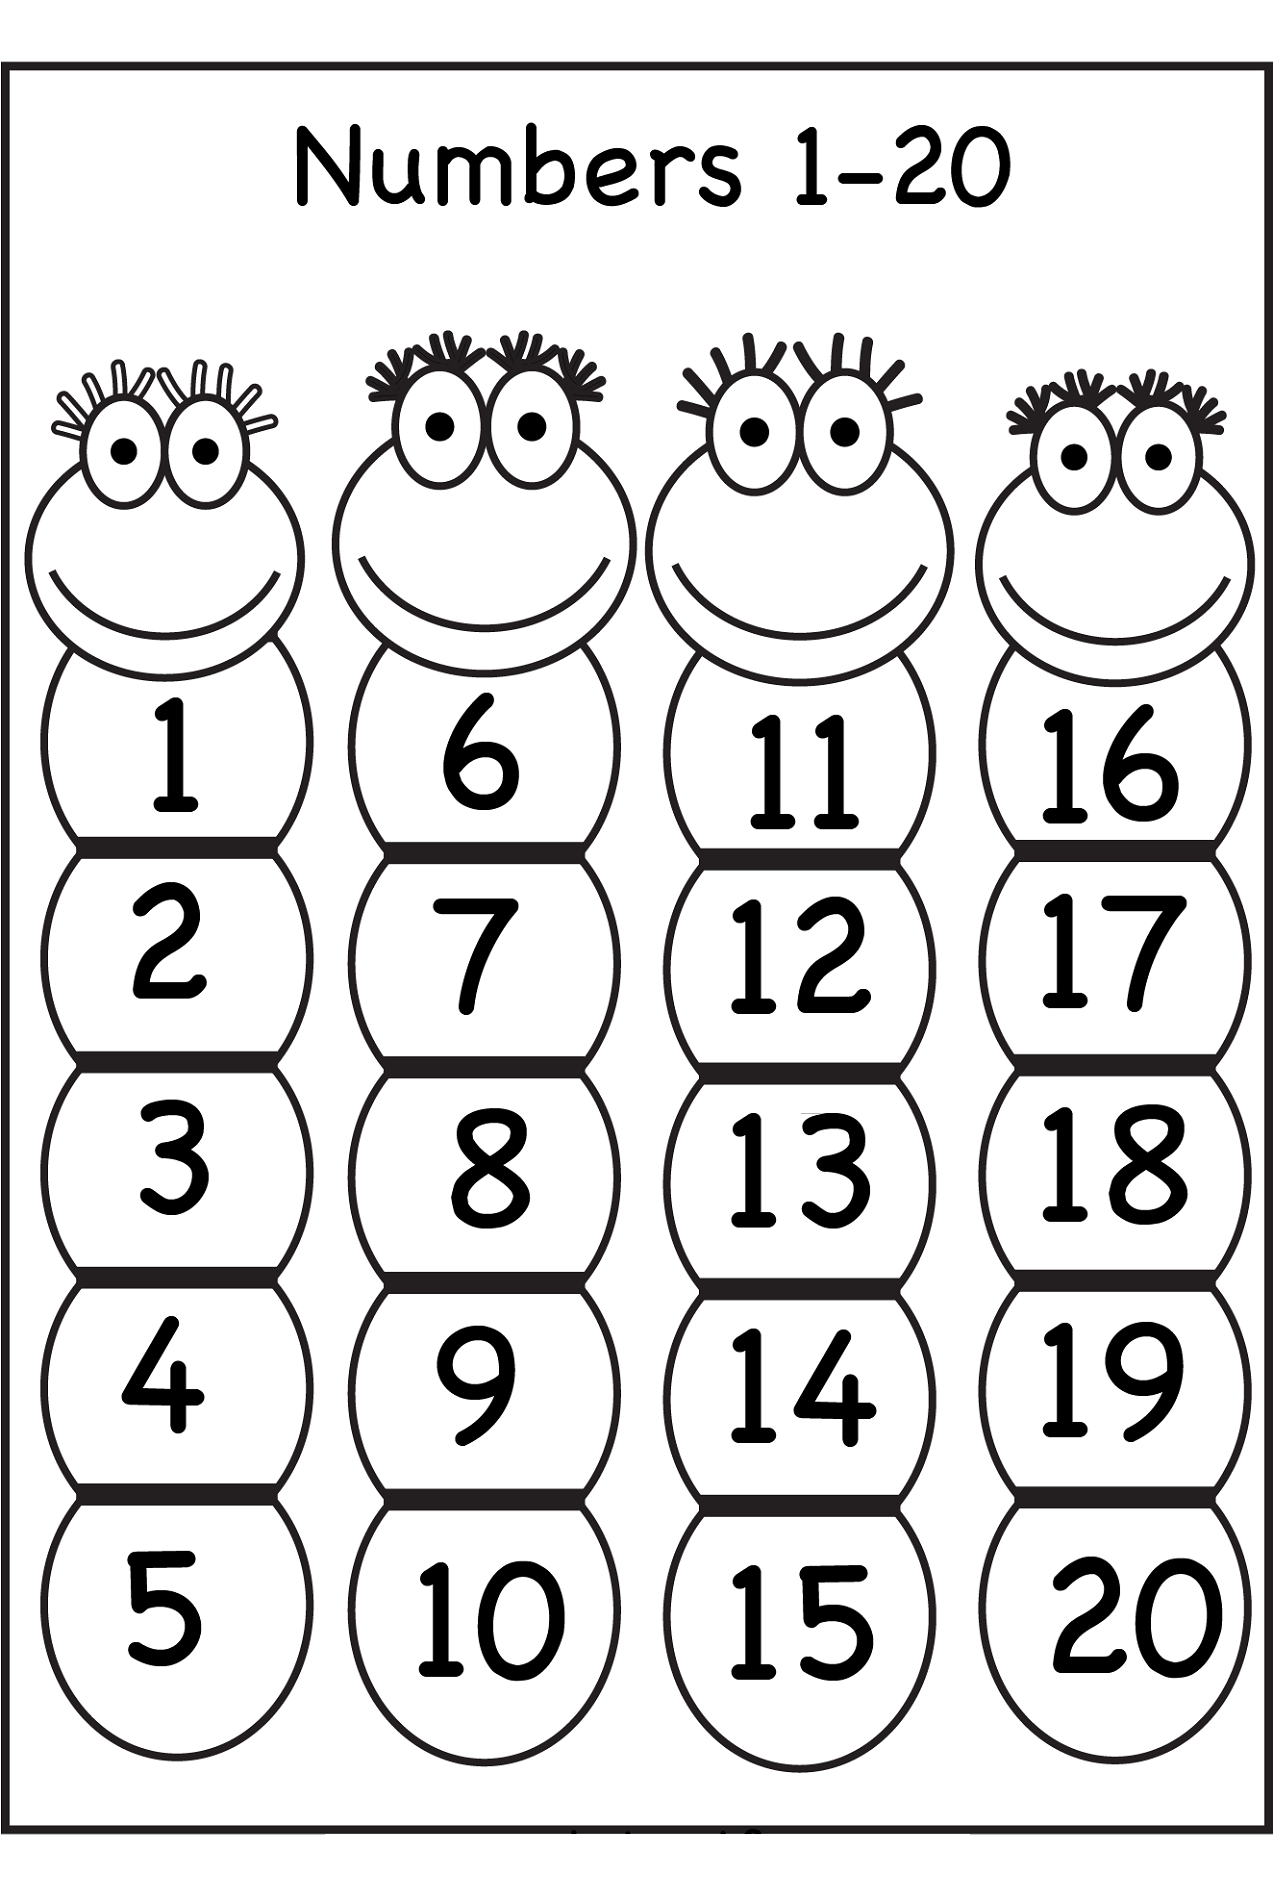 Numbers 1 20 Online Pdf Worksheet Free Printable Number Counting Worksheets Count And Match 